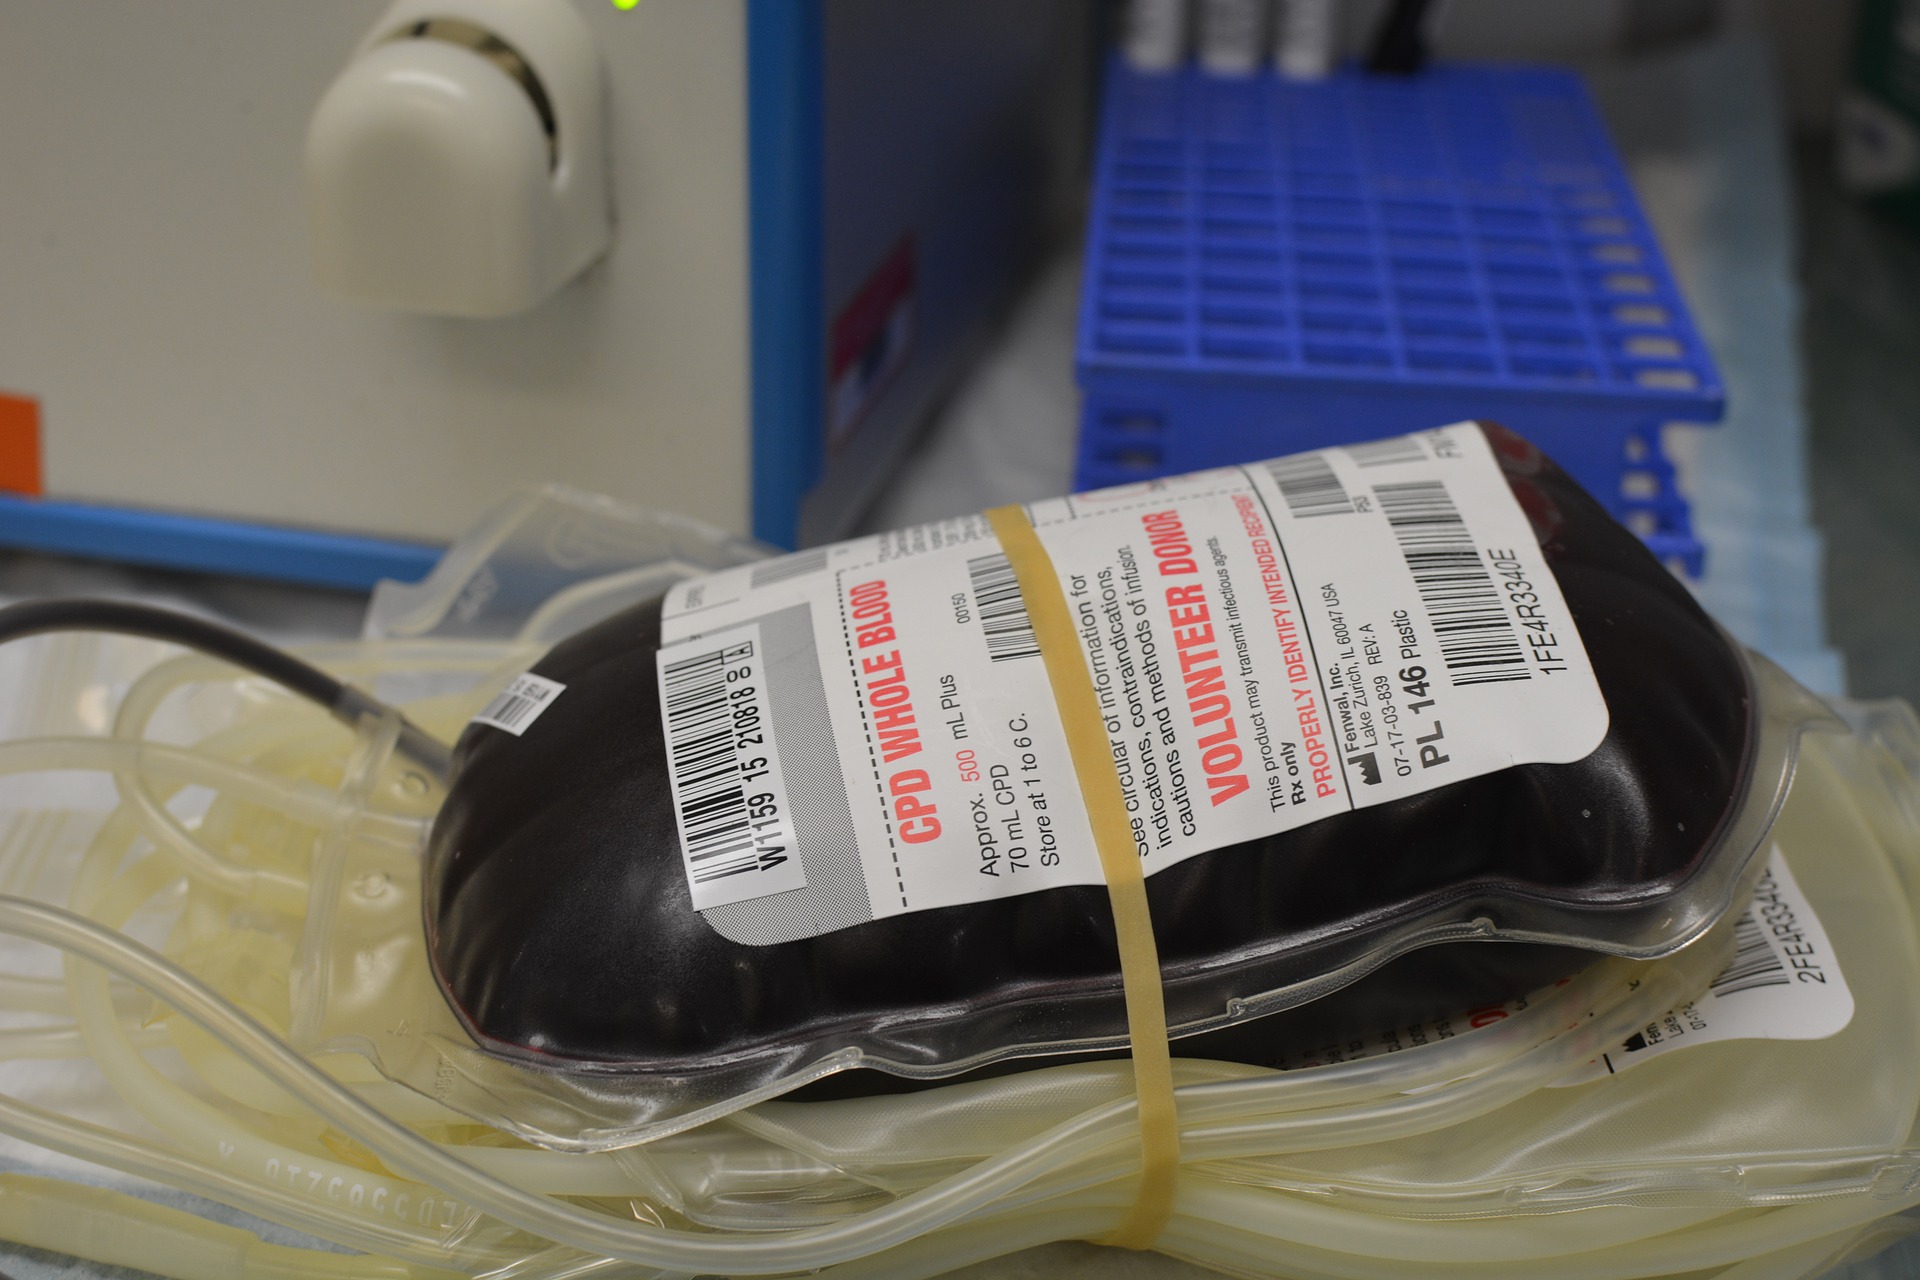 Why do you charge hospitals for blood I give for free?